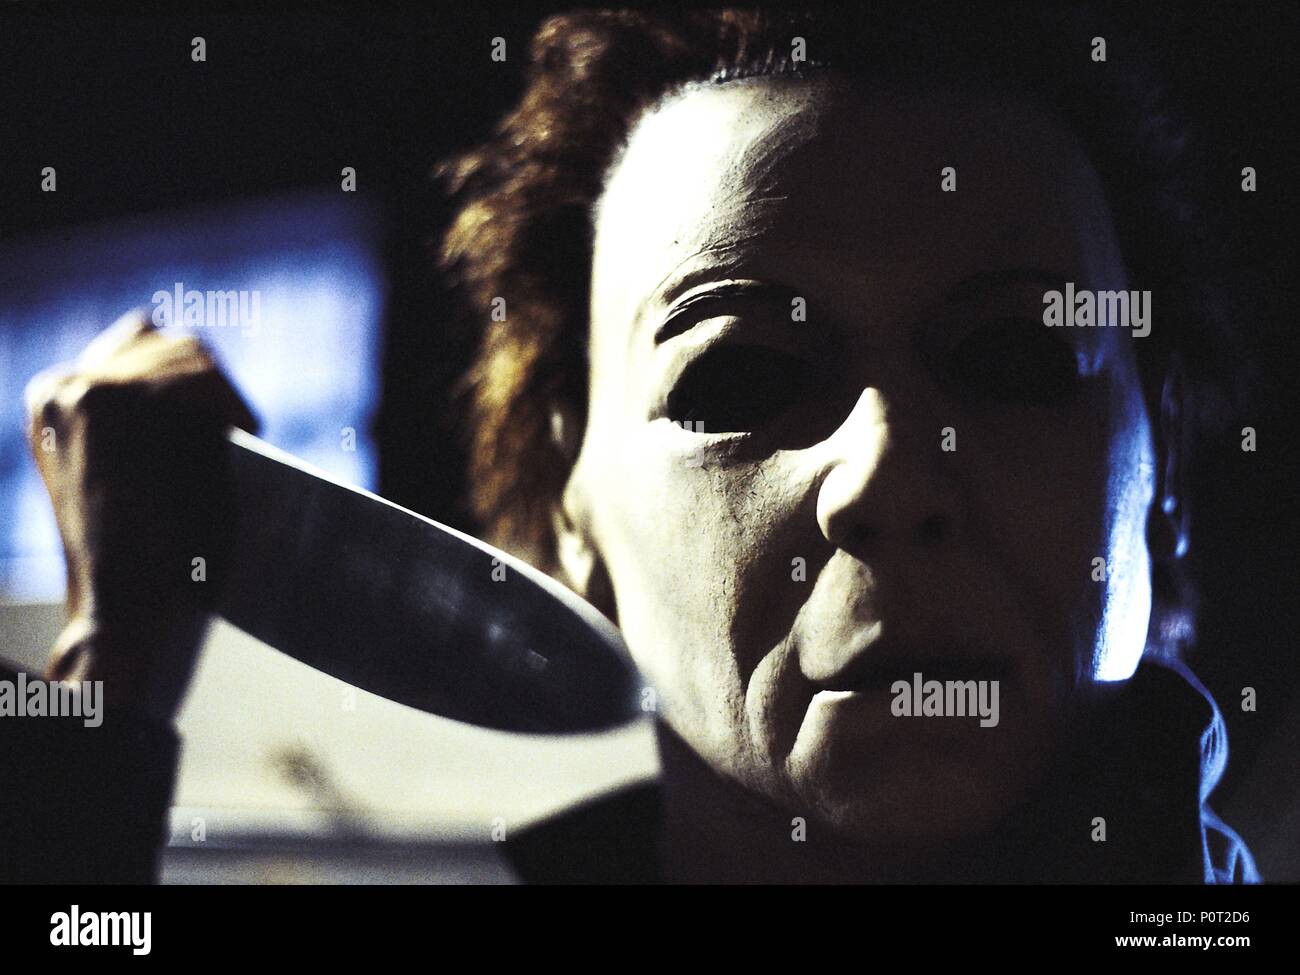 Original Film Title: HALLOWEEN: RÉSURRECTION.  English Title: HALLOWEEN: RÉSURRECTION.  Film Director: RICK ROSENTHAL.  Year: 2002. Copyright: Editorial inside use only. This is a publicly distributed handout. Access rights only, no license of copyright provided. Mandatory authorization to Visual Icon (www.visual-icon.com) is required for the reproduction of this image. Credit: DIMENSION FILMS / Album Stock Photo